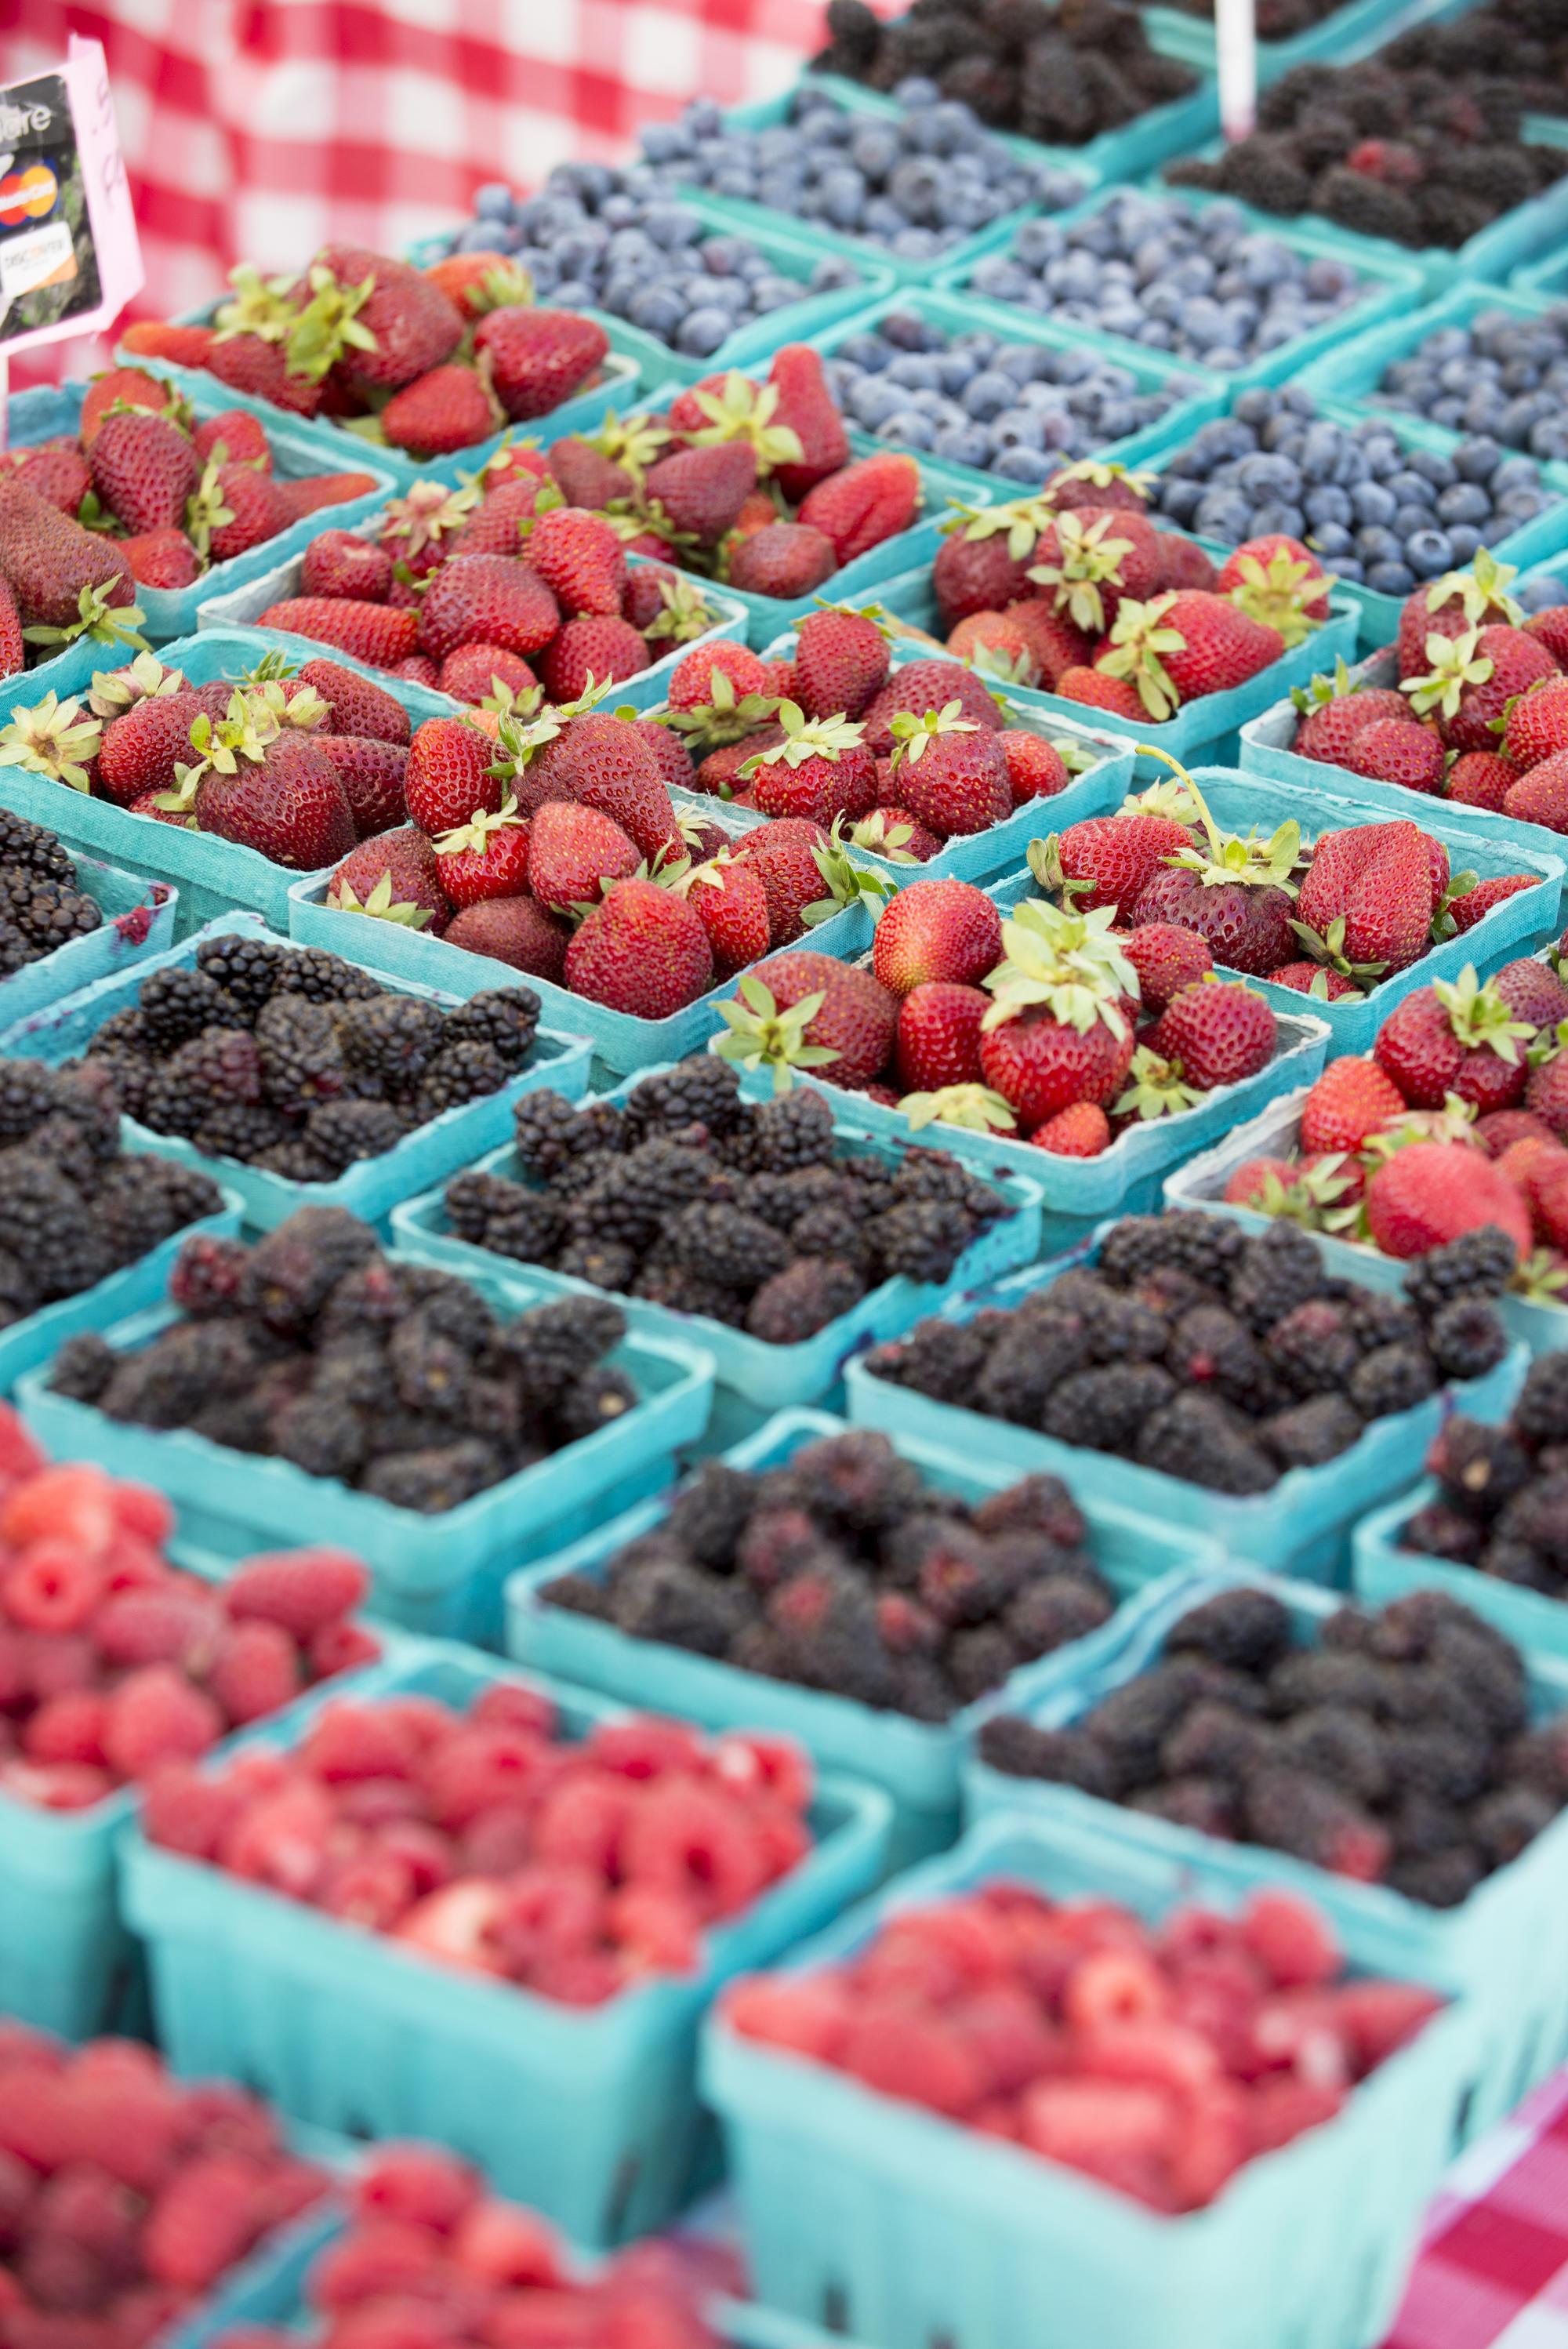 Berries at a farmers market